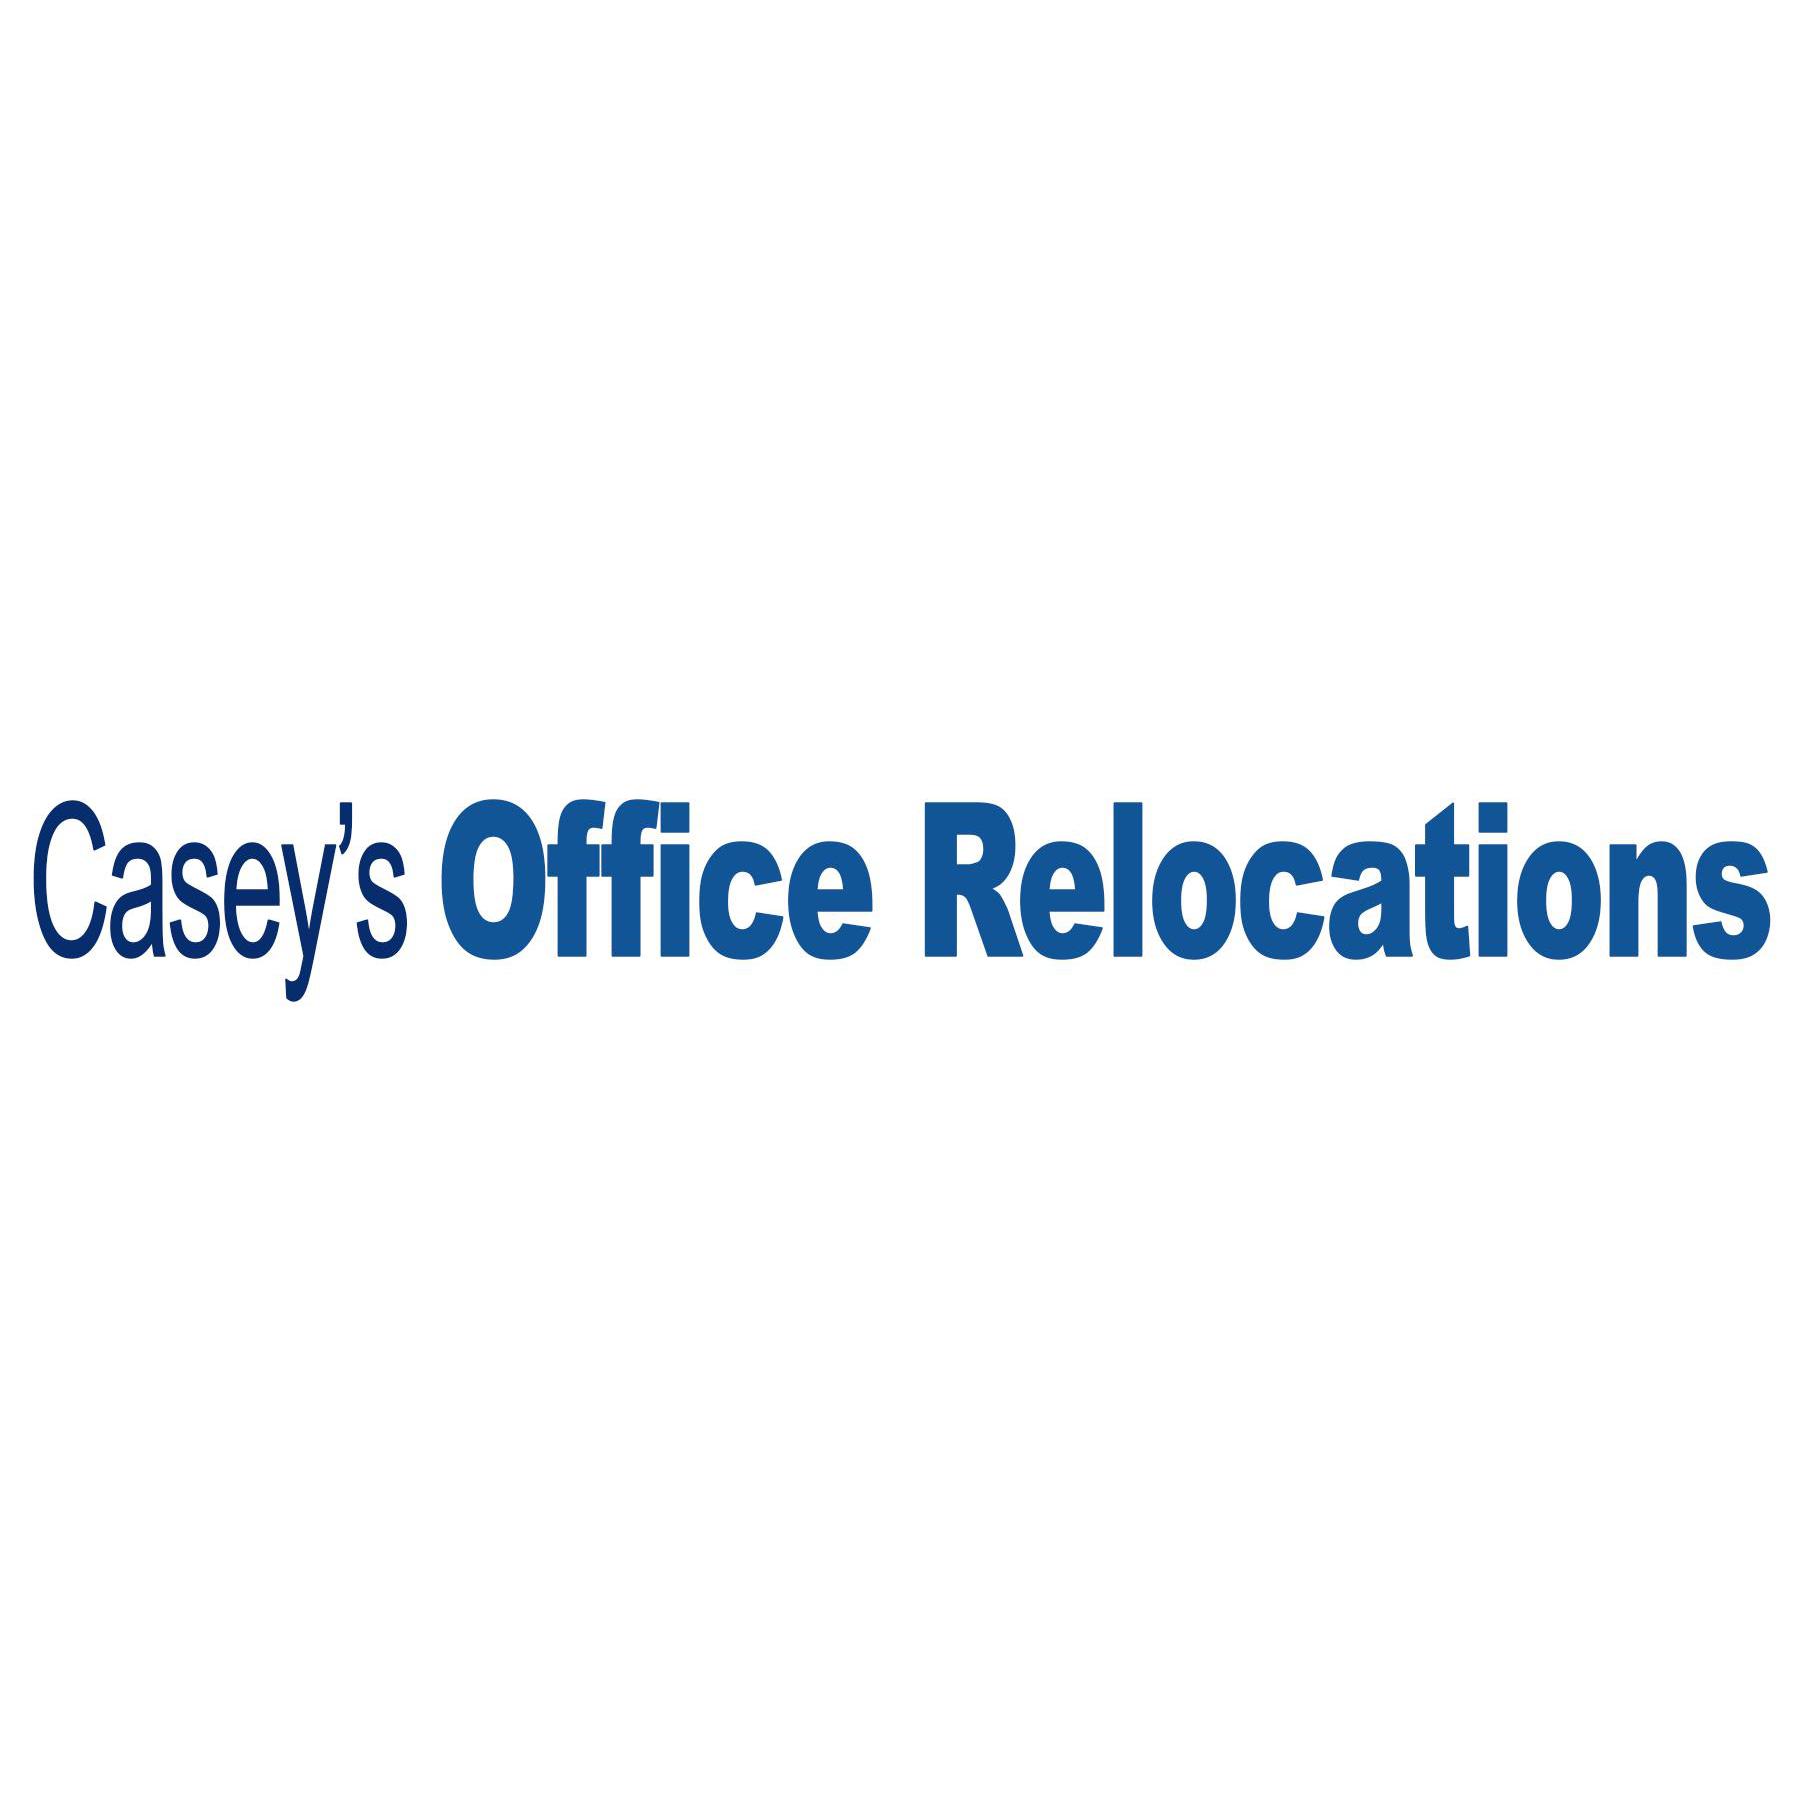 LOGO Casey's Office Relocations London 08006 335932